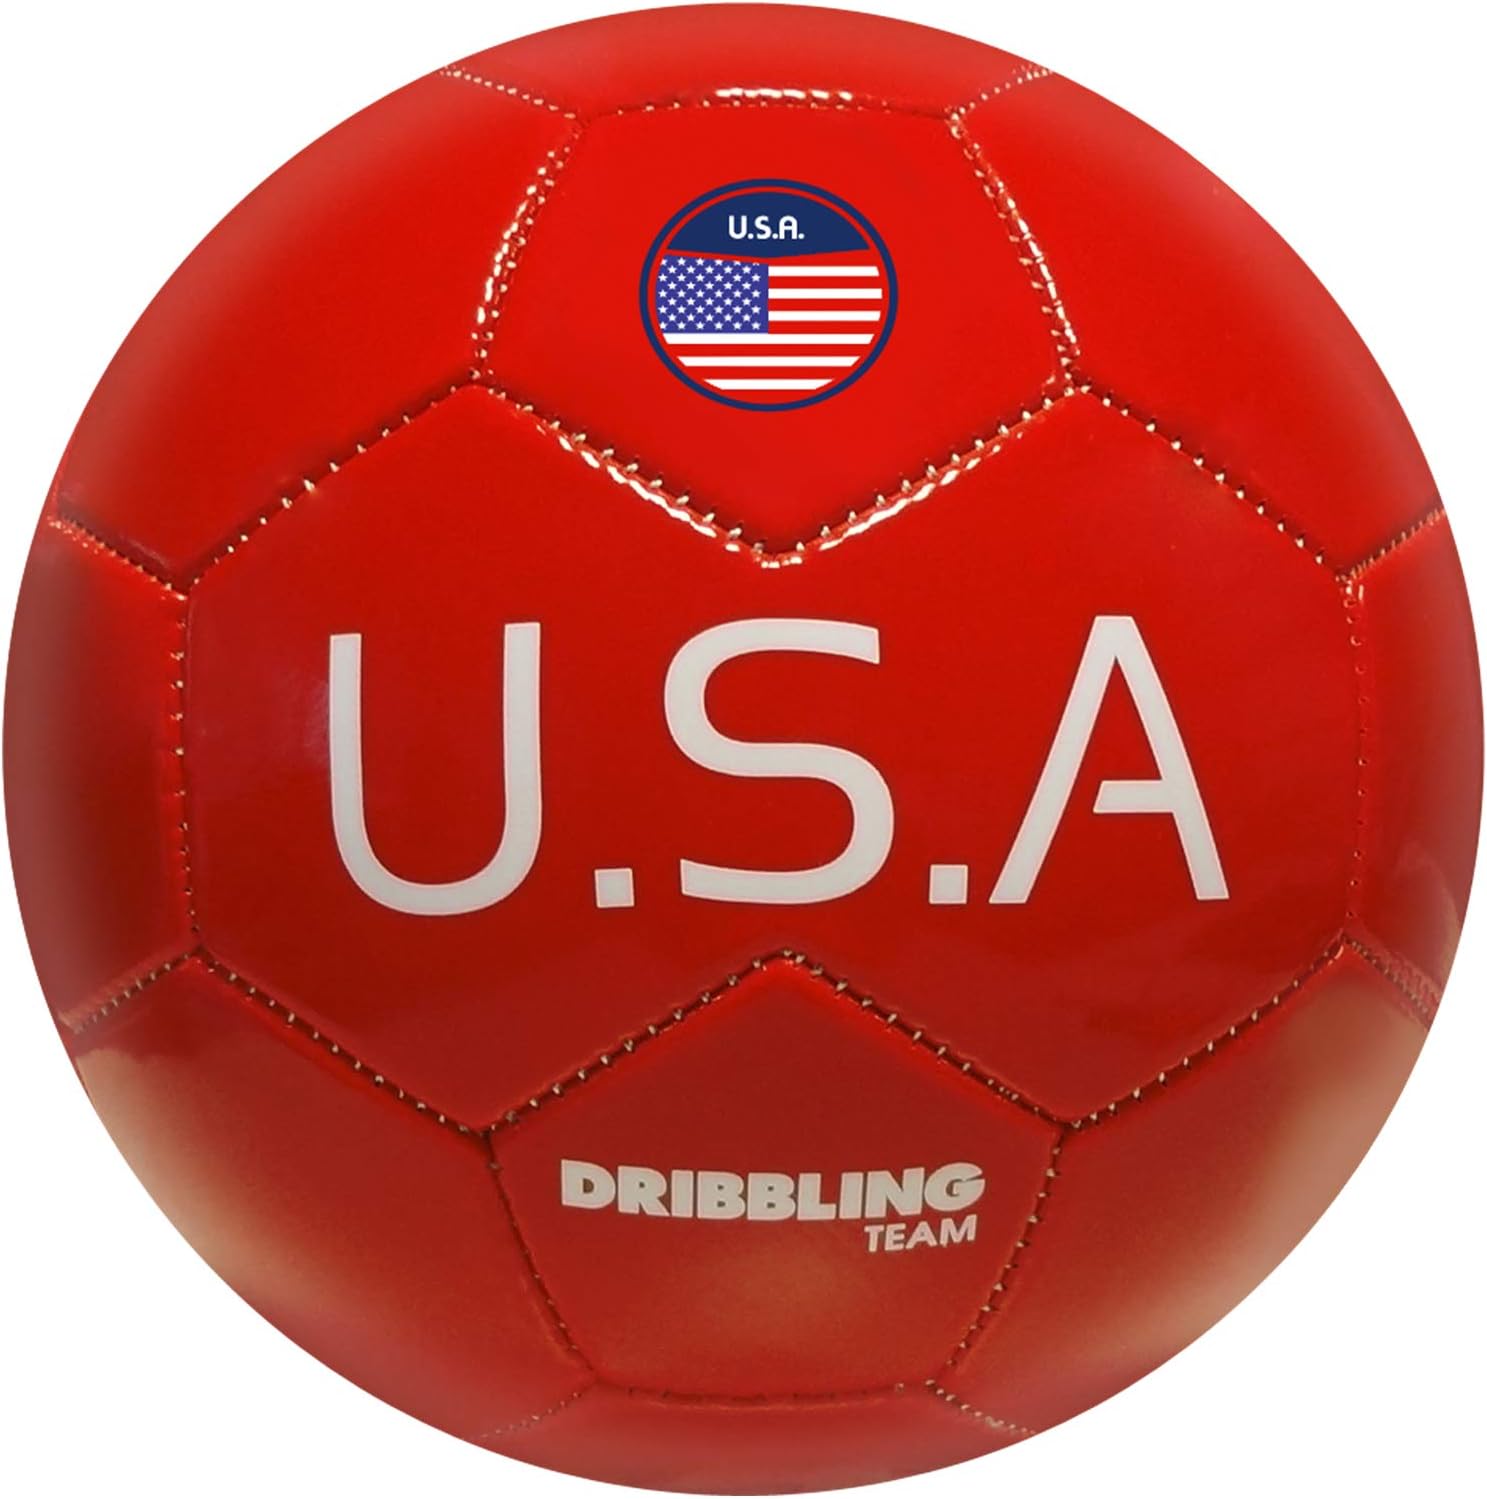 DRB DRIBBLING Soccer Ball USA Red Color Size 2 Match Soccer Ball for Practice & Training for Kids Youth